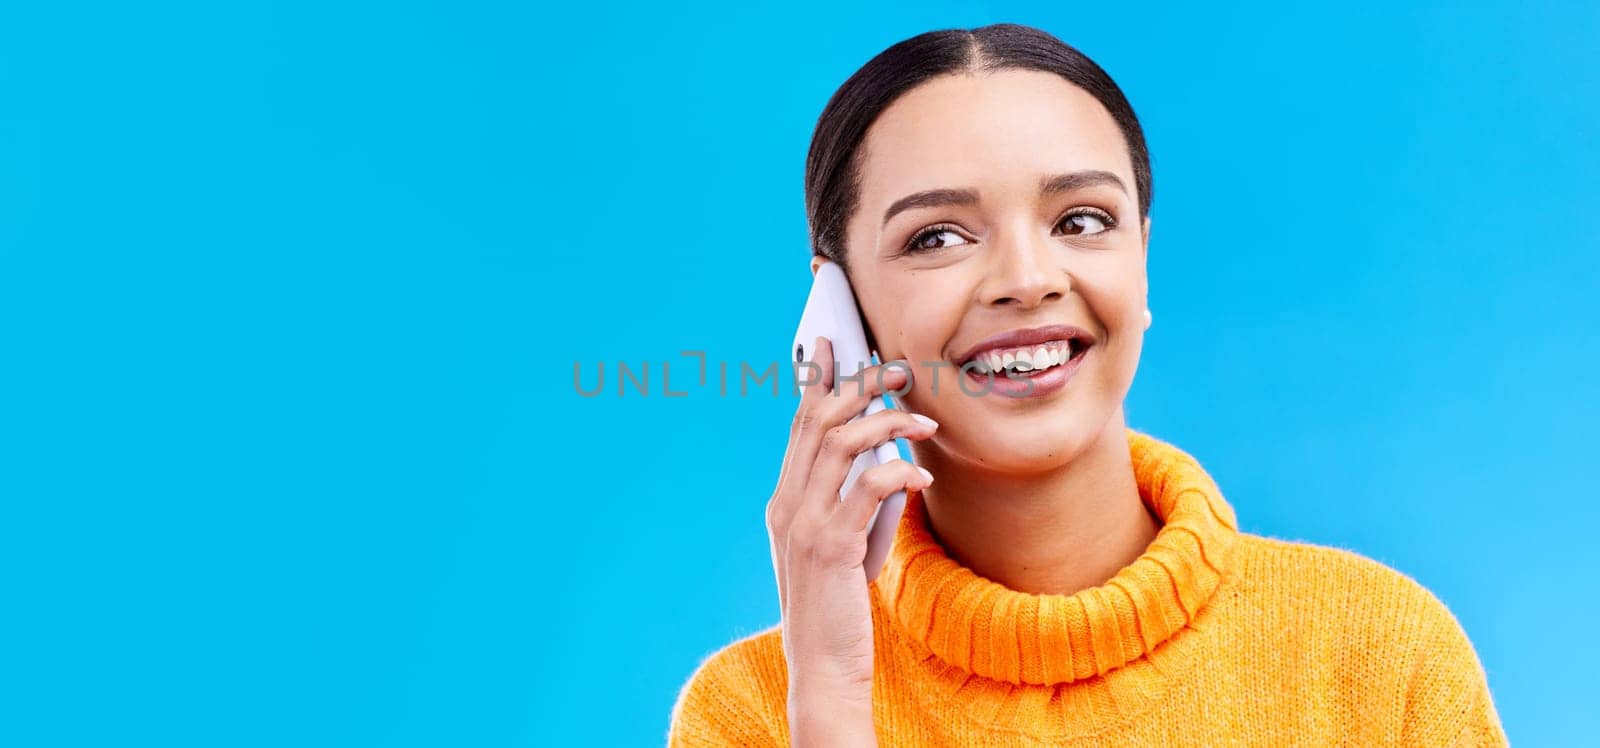 Happy woman, phone call and communication on mockup for social media, conversation or chat against a blue studio background. Female smiling on mobile smartphone in discussion or talking on copy space by YuriArcurs